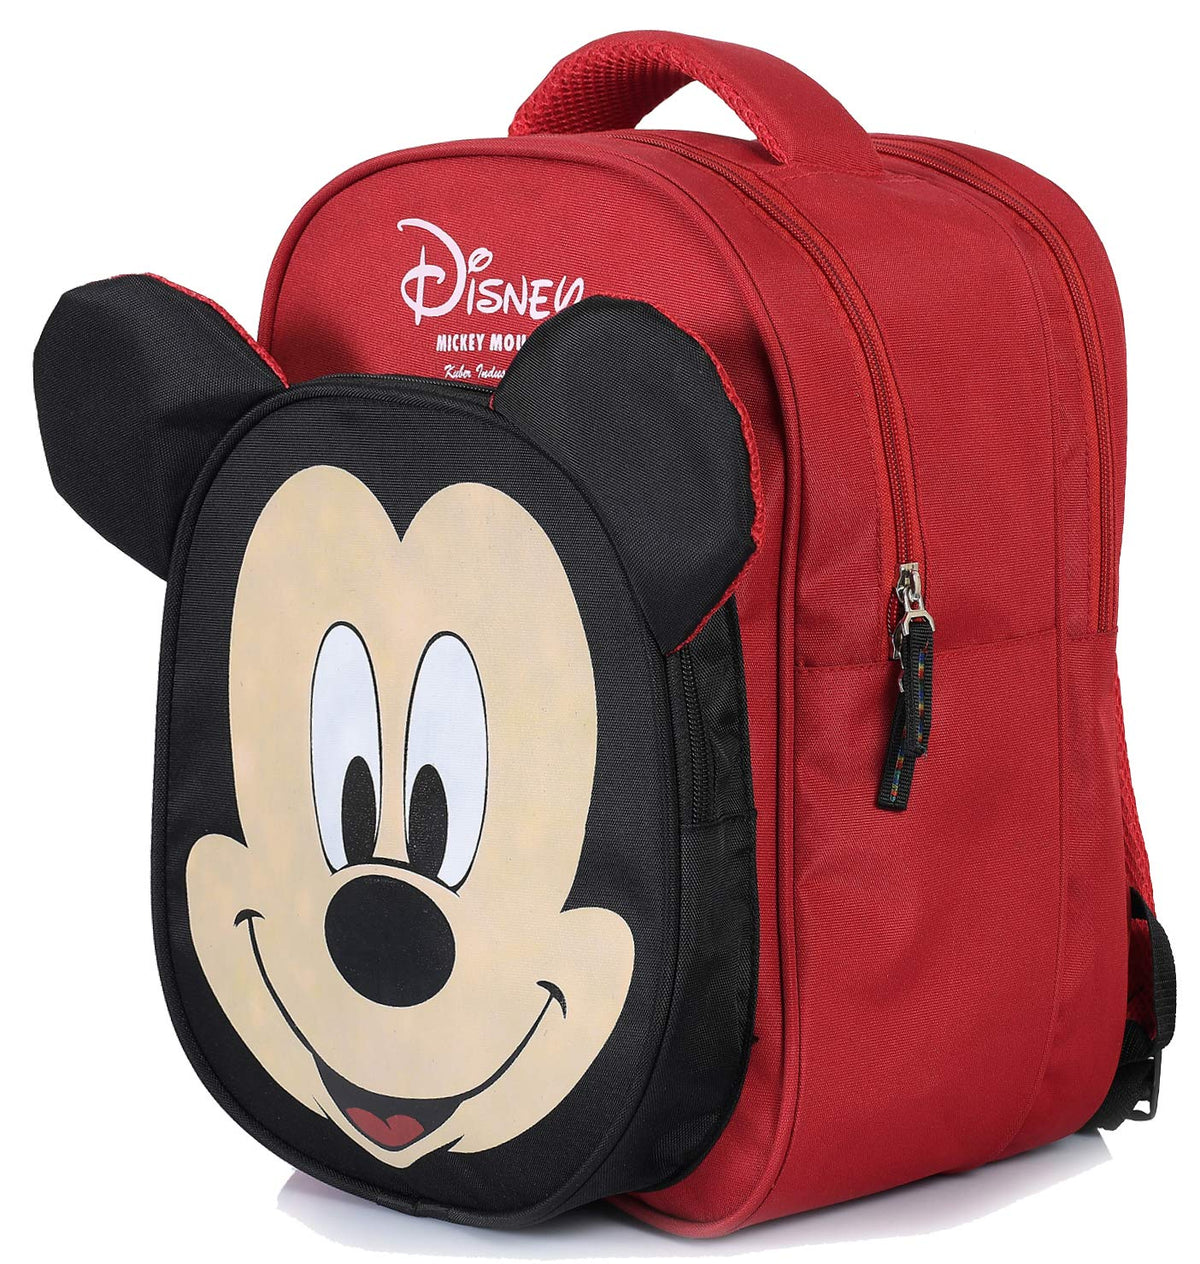 Kuber Industries Disney Mickey Mouse 15 inch Polyster School Bag/Backpack For Kids, Red & Black-DISNEY001